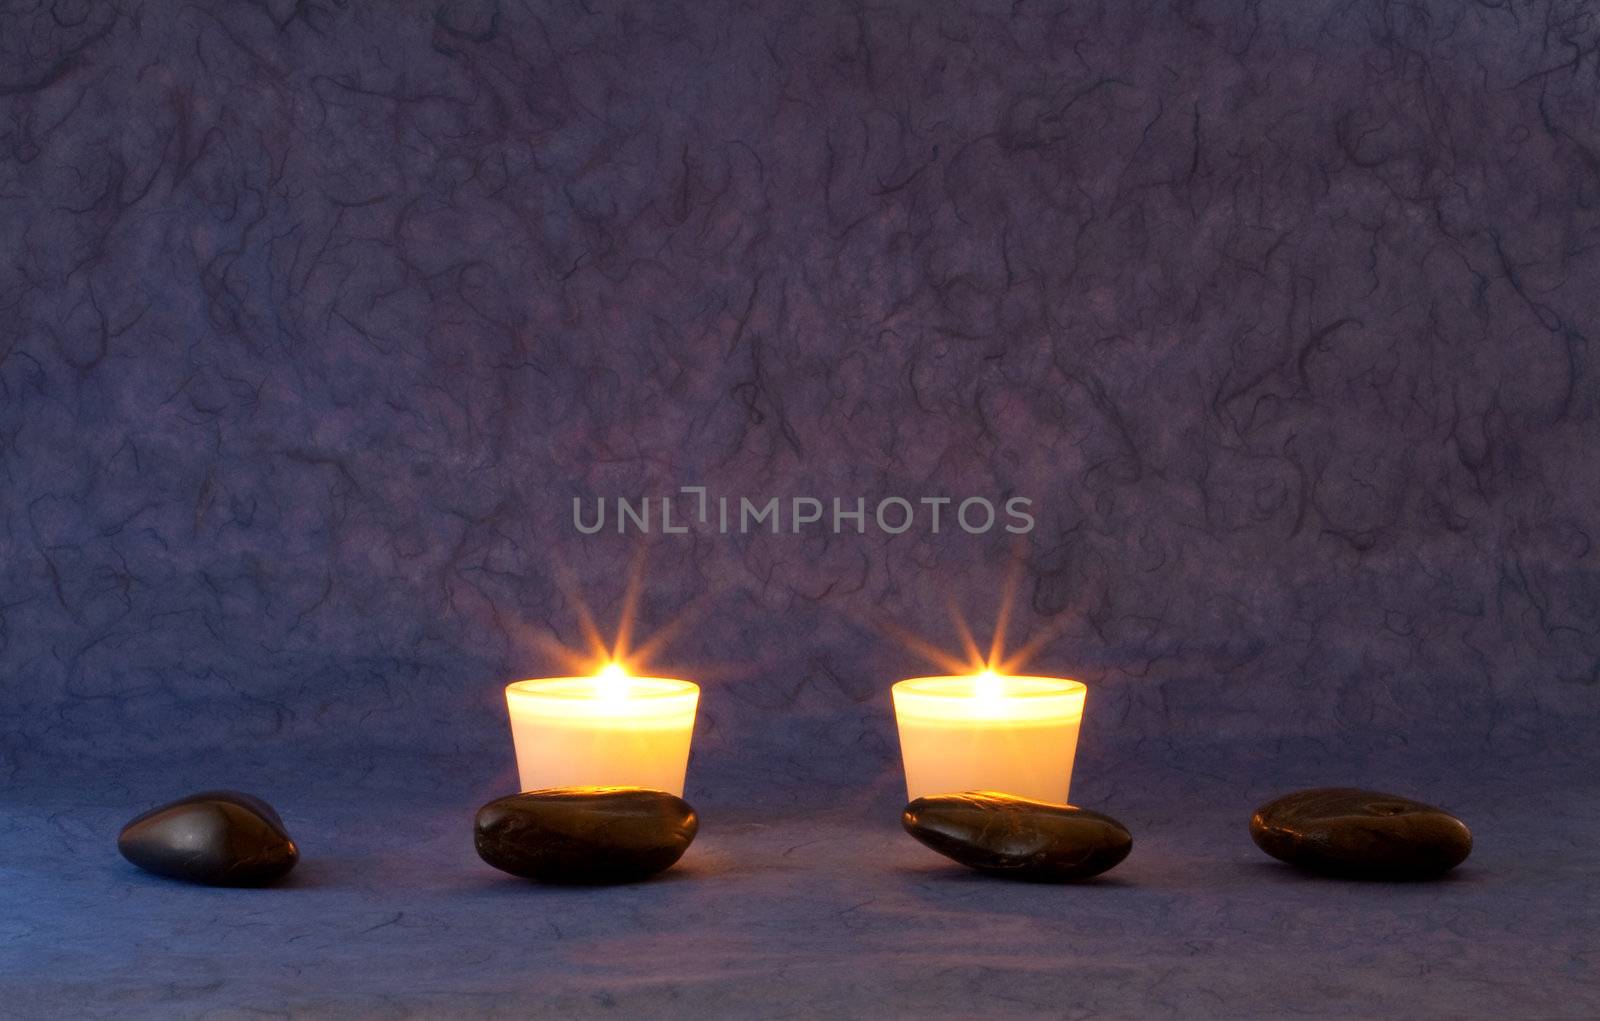 A set of massage stones on blue/purple wallpaper with candles